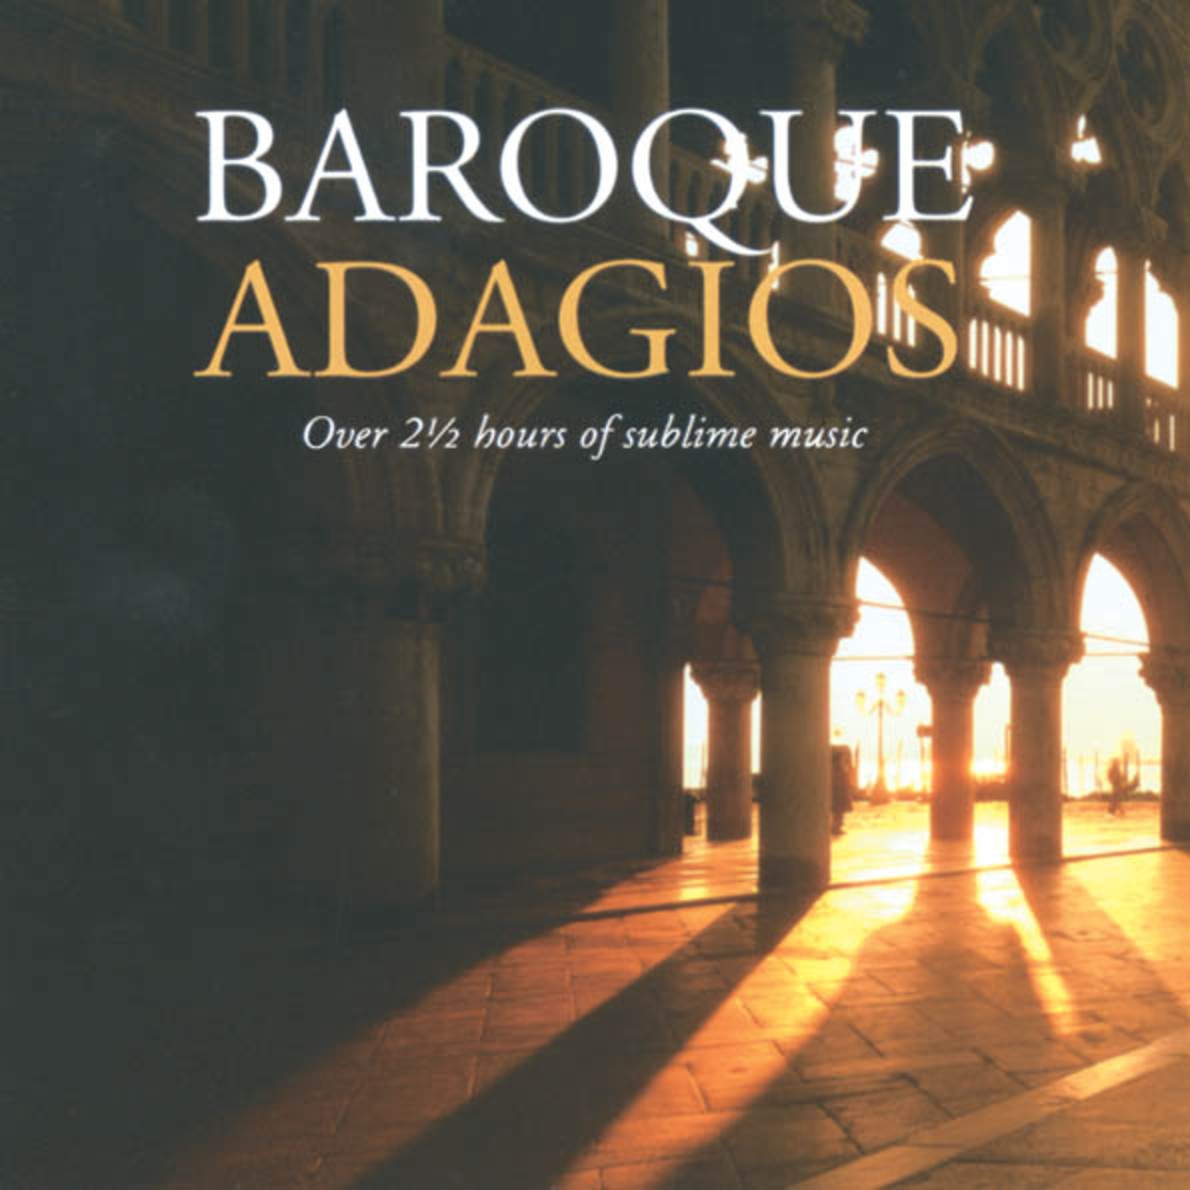 J.S. Bach: Concerto for 2 Harpsichords, Strings, and Continuo in C minor, BWV 1060 - performing edition by C. Hogwood for violin, oboe and strings - 2. Adagio